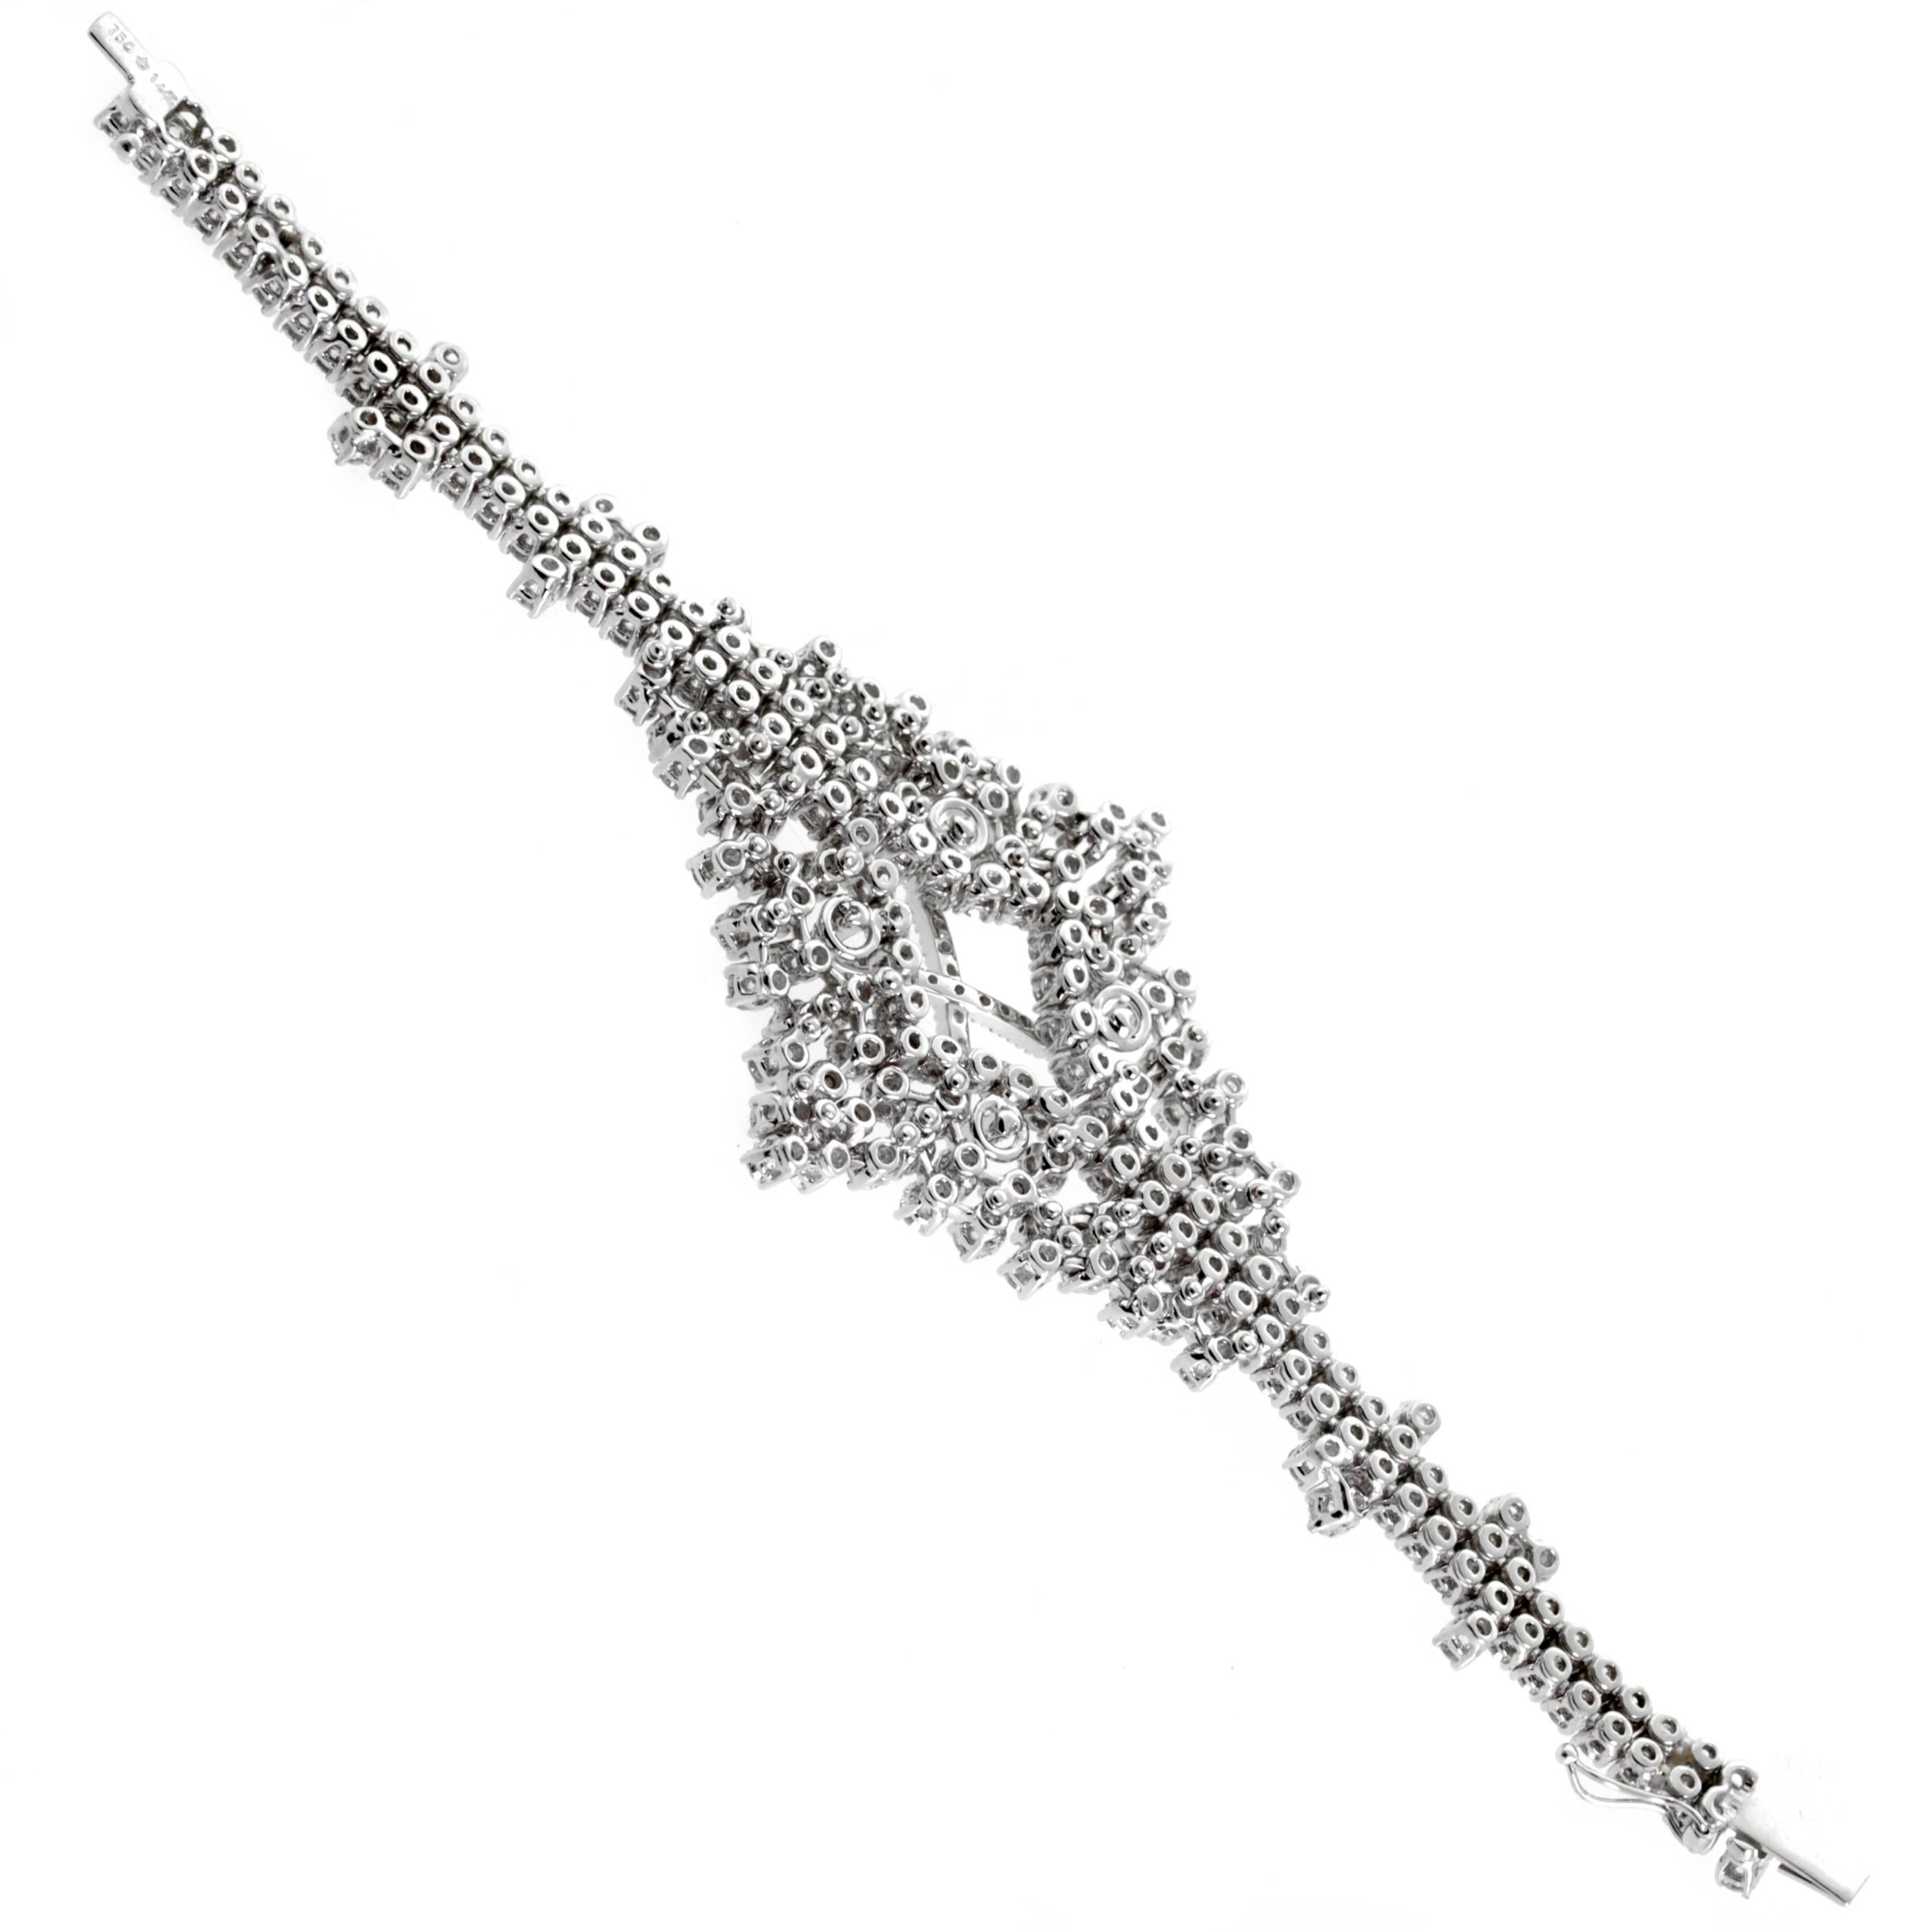 A fabulous hand made 18k white gold diamond bracelet set with appx 14.4cts of round brilliant shiny perfect cut diamonds (Vs-Si1) quality hand set in 18k white gold. The bracelet measures 1.65" at the widest point and 5.90" in length.